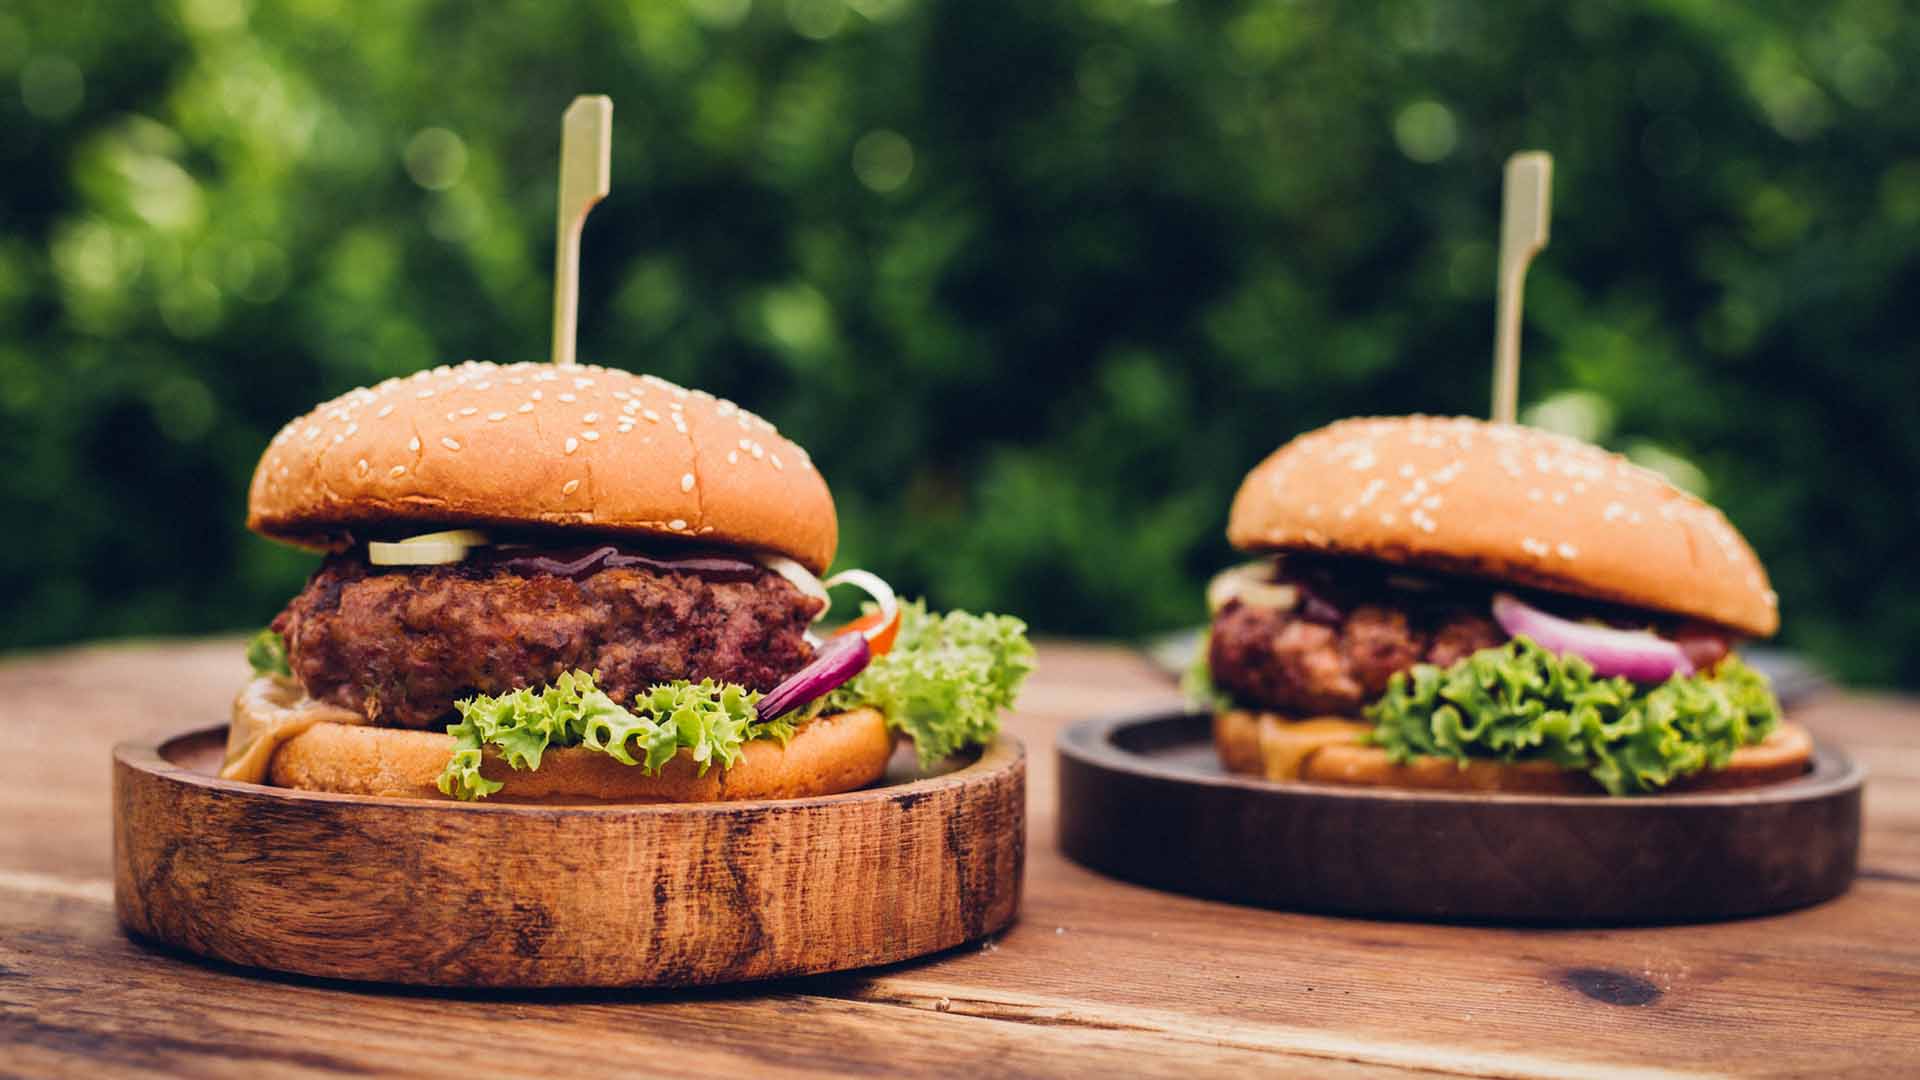 Low angle shot of two delicious gourmet burgers with high quality beef and fresh ingredients presented on wooden platters outdoors in a lush back yard